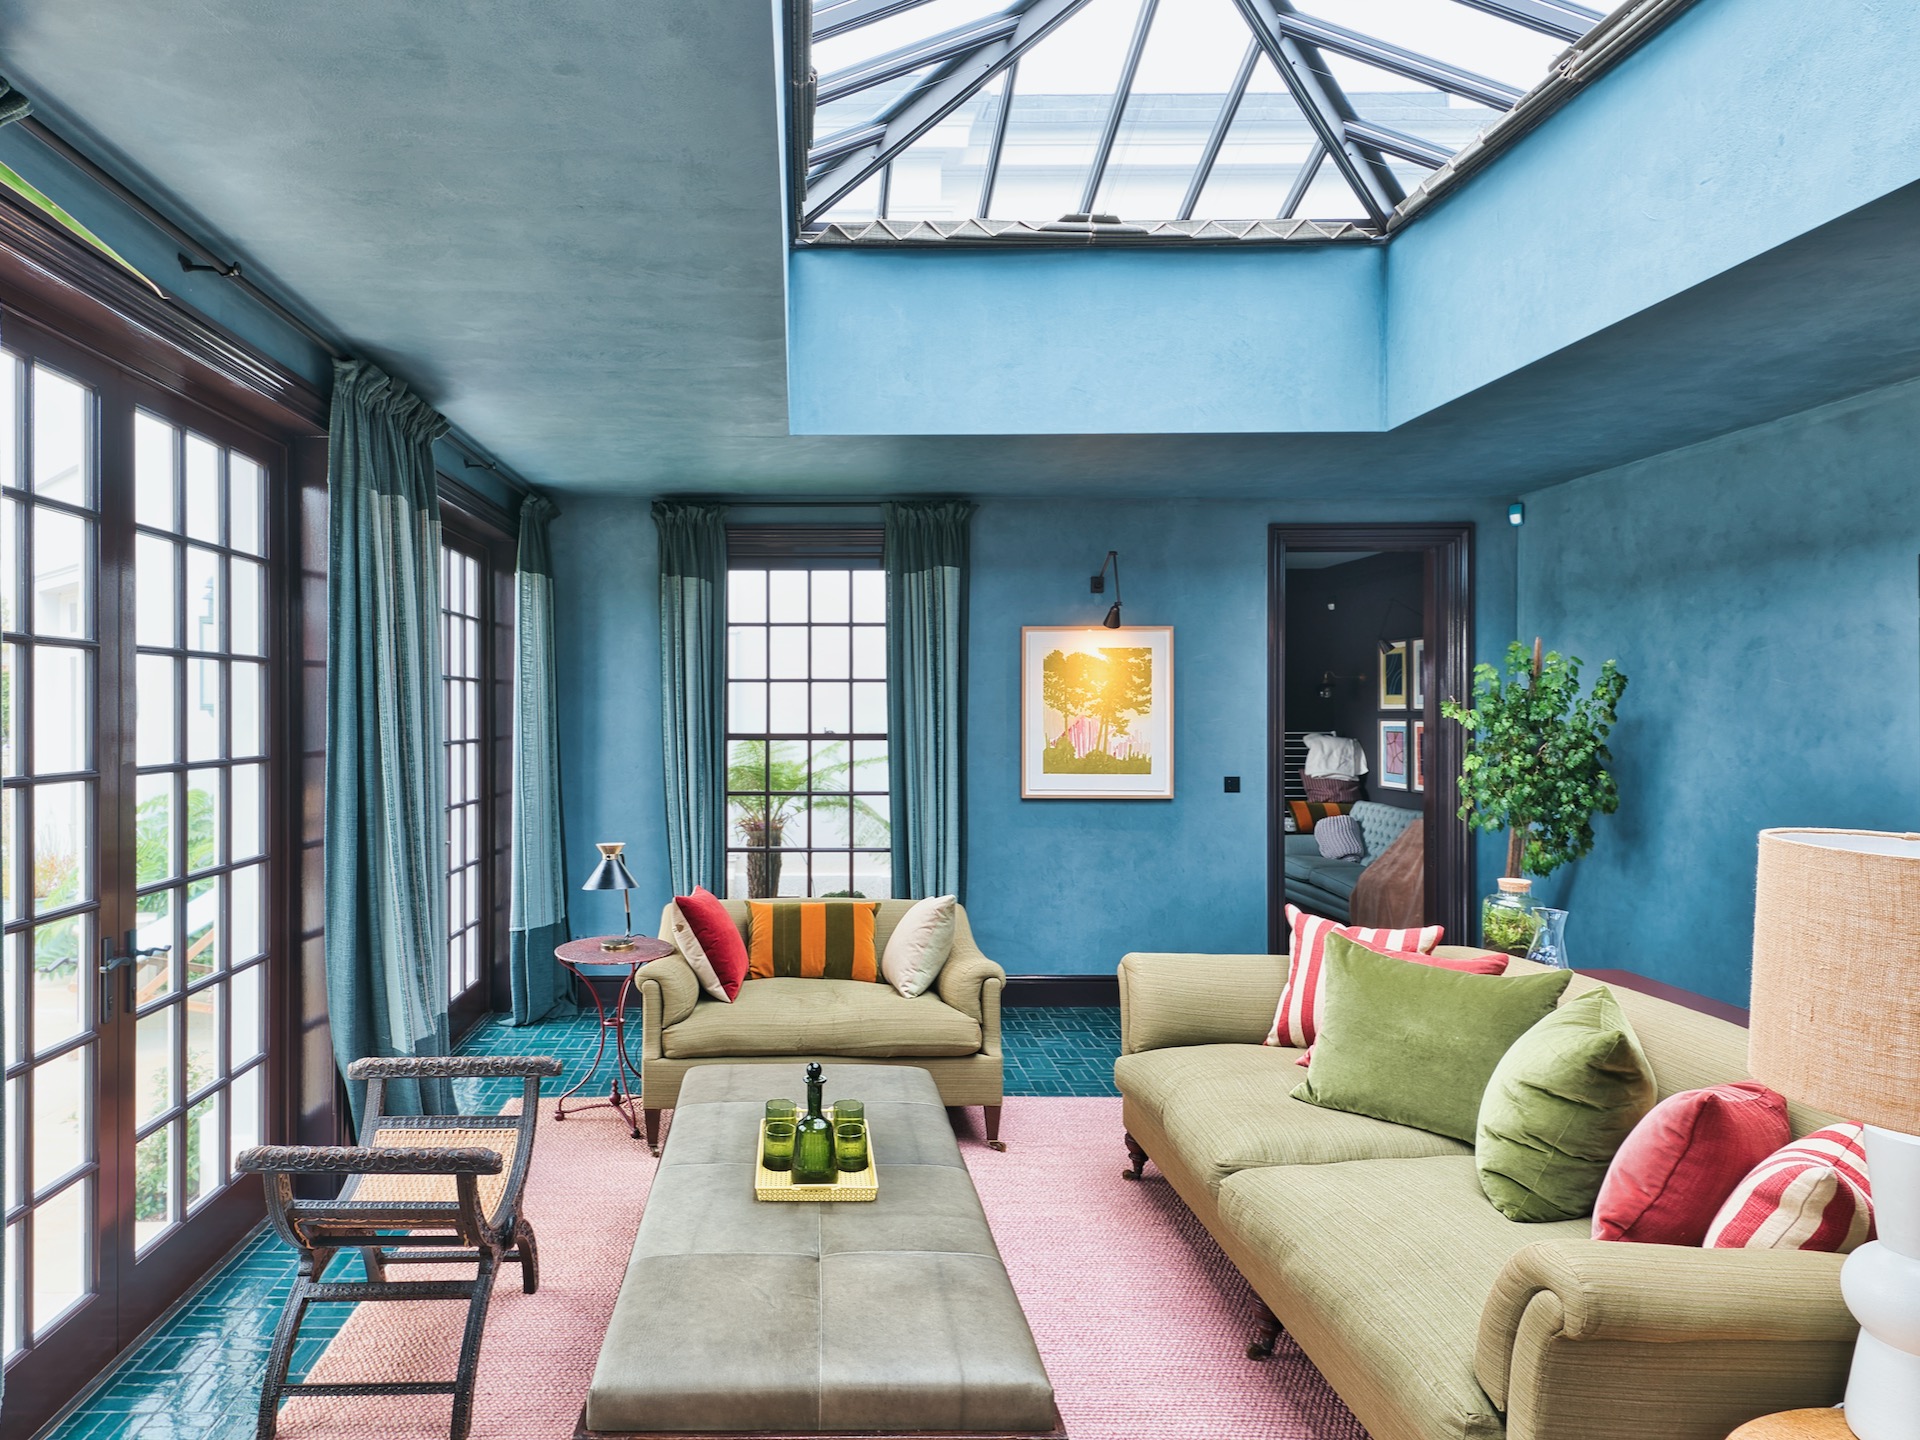 Conservatory sitting room with blue walls and green sofas